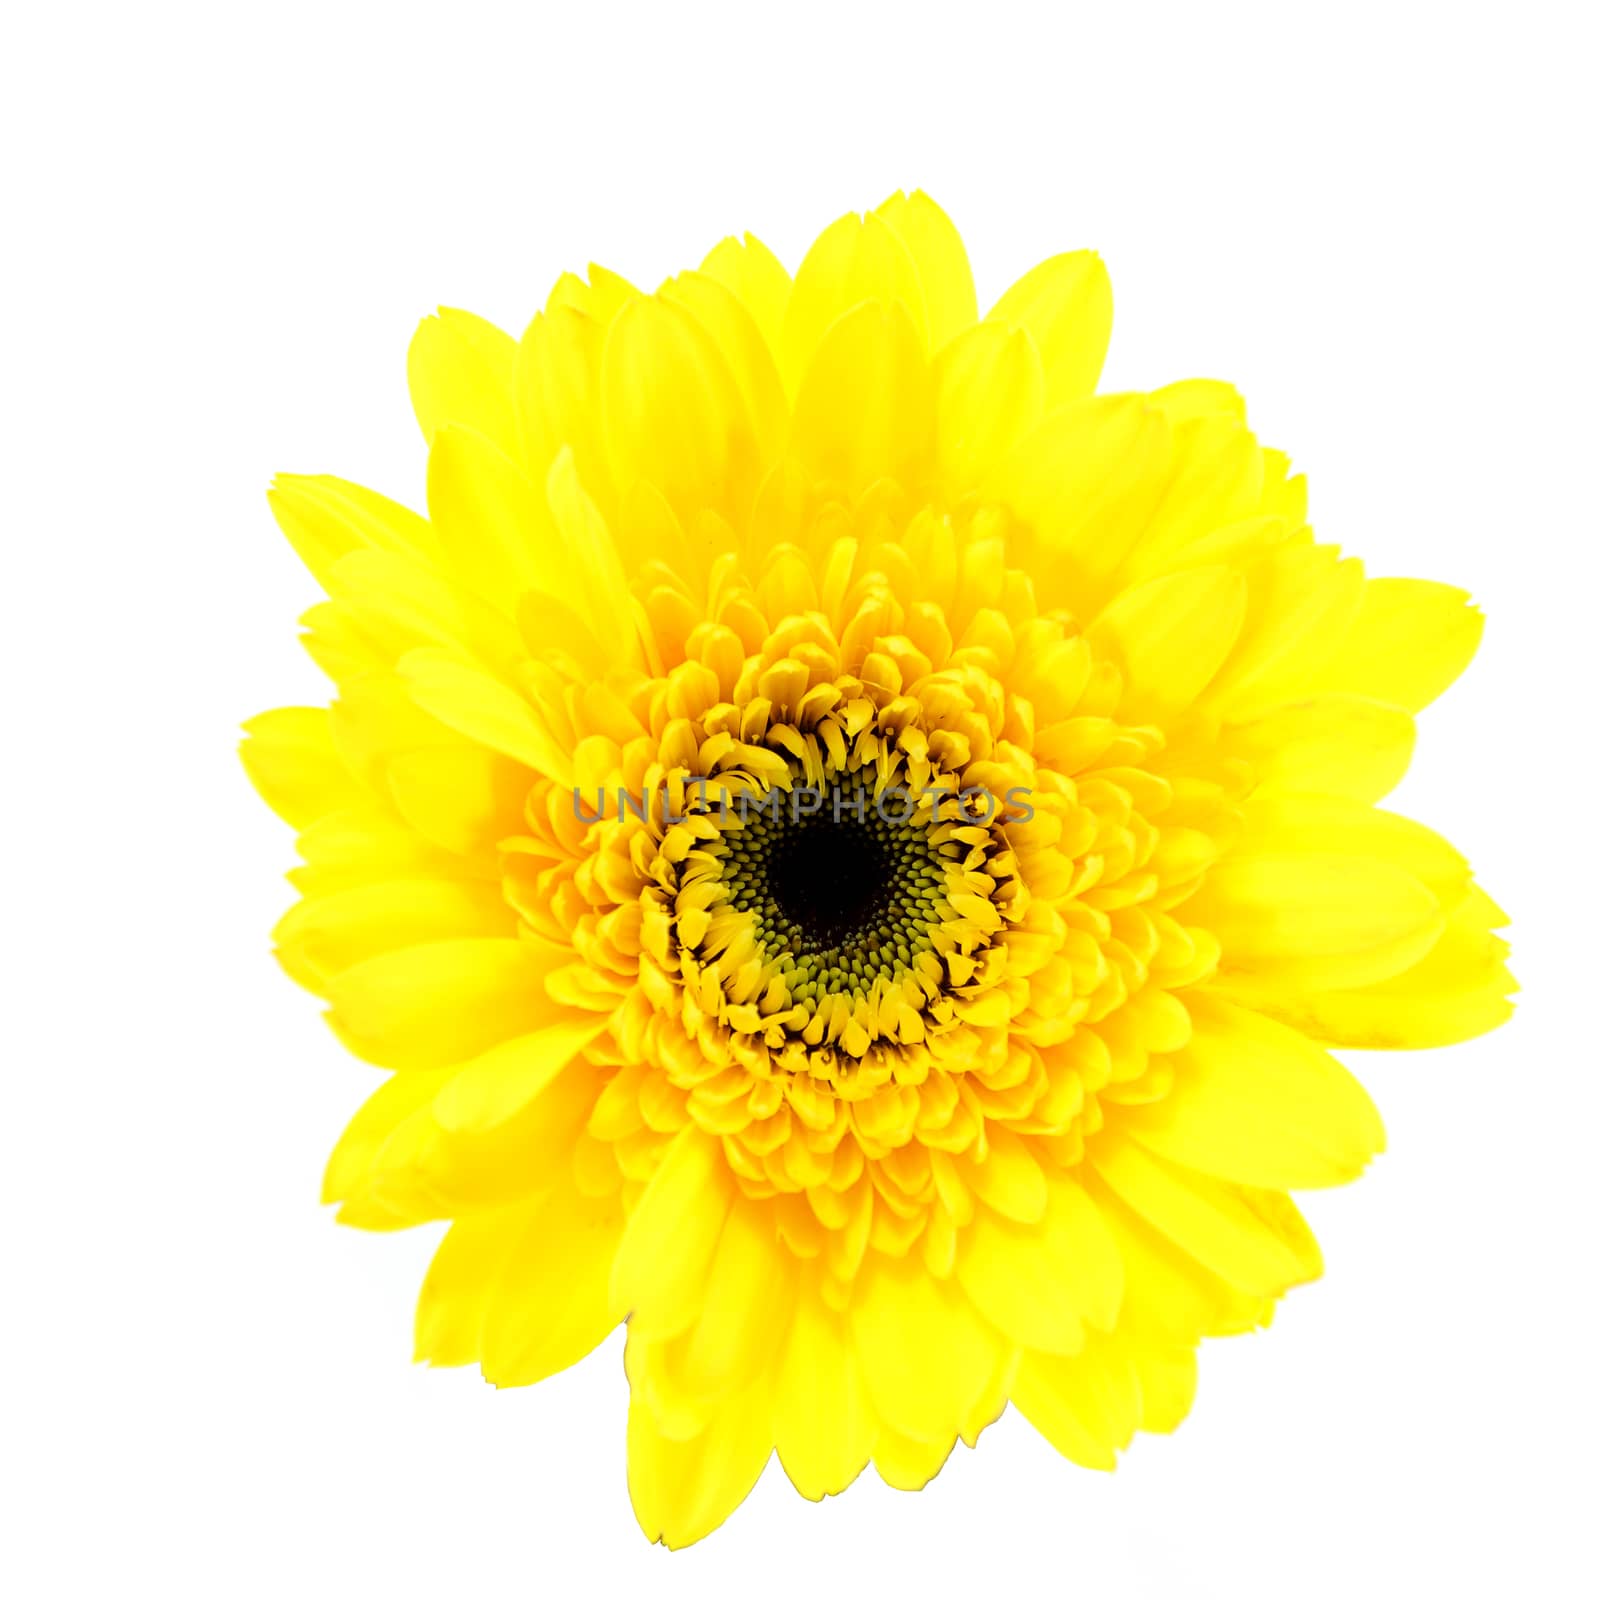 african daisy (gerbera) isolated on white